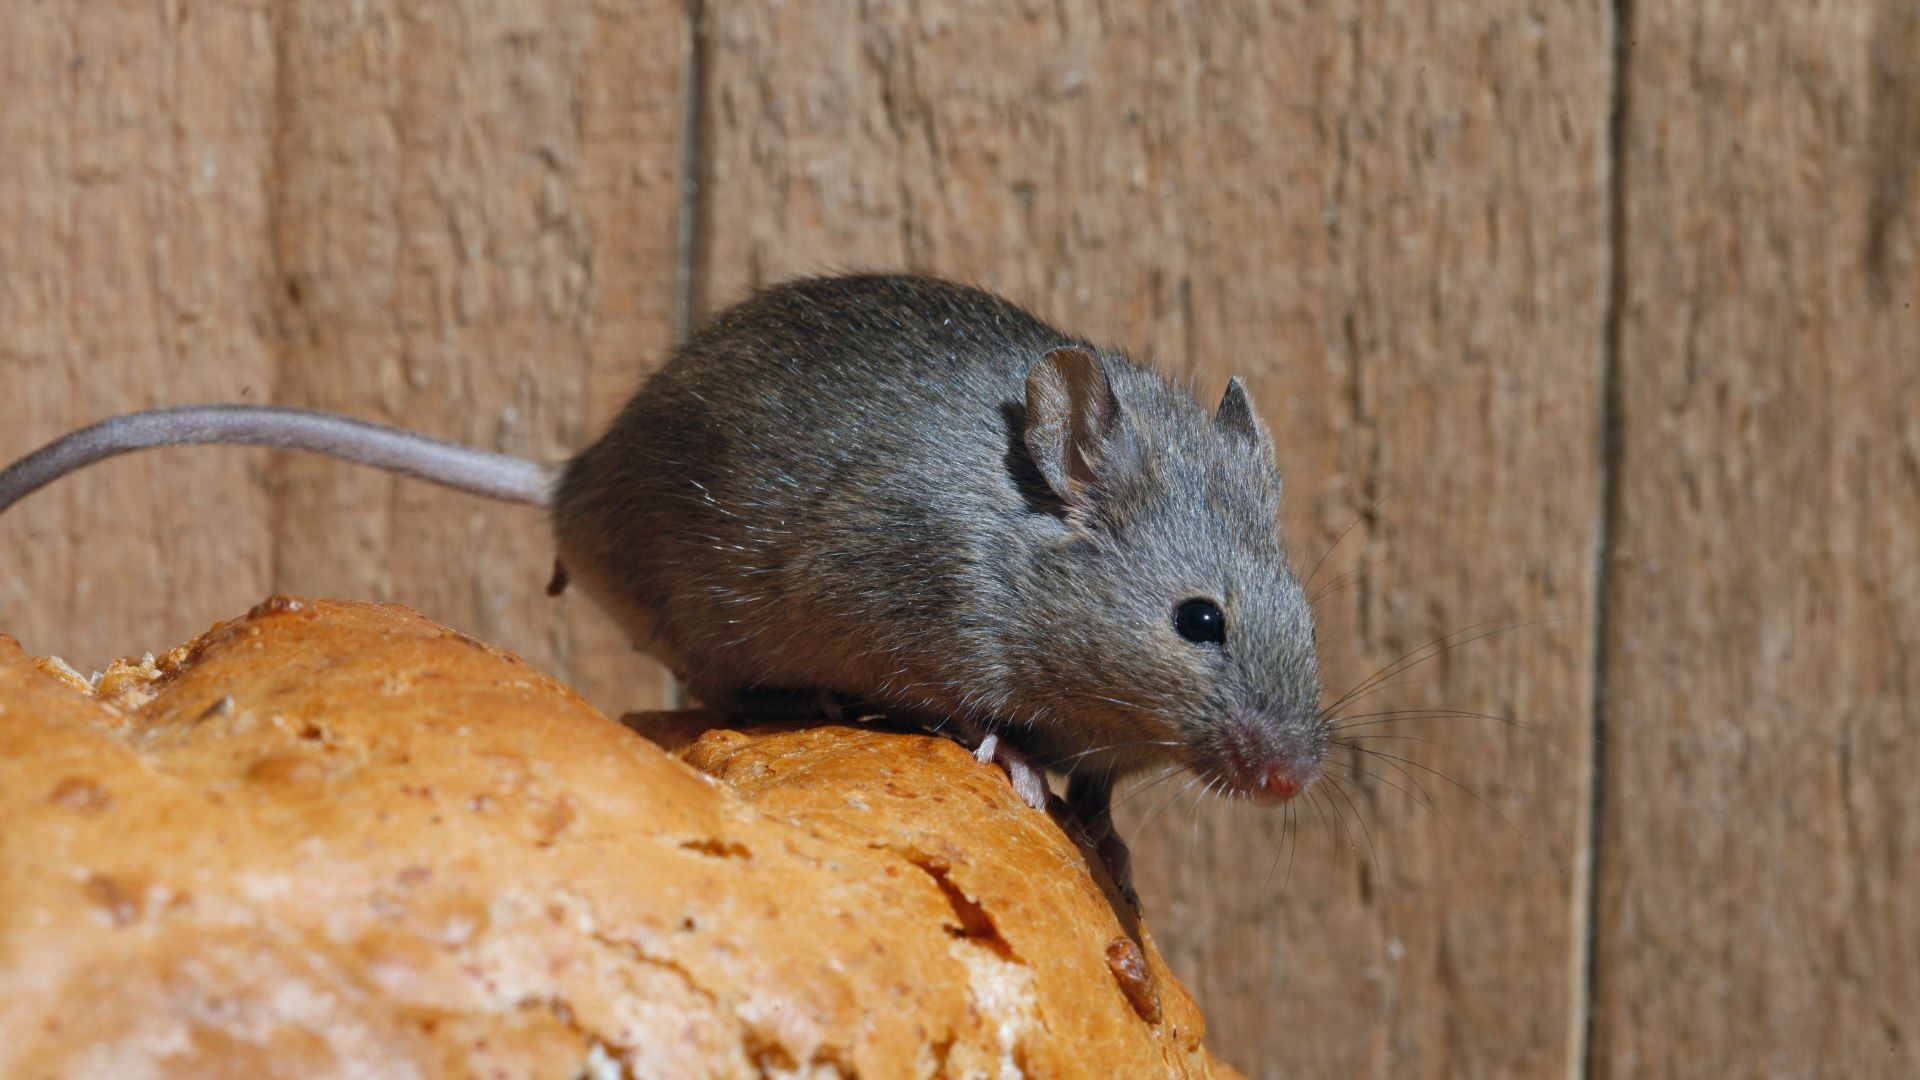 A picture of a mouse climbing on a piece of bread.